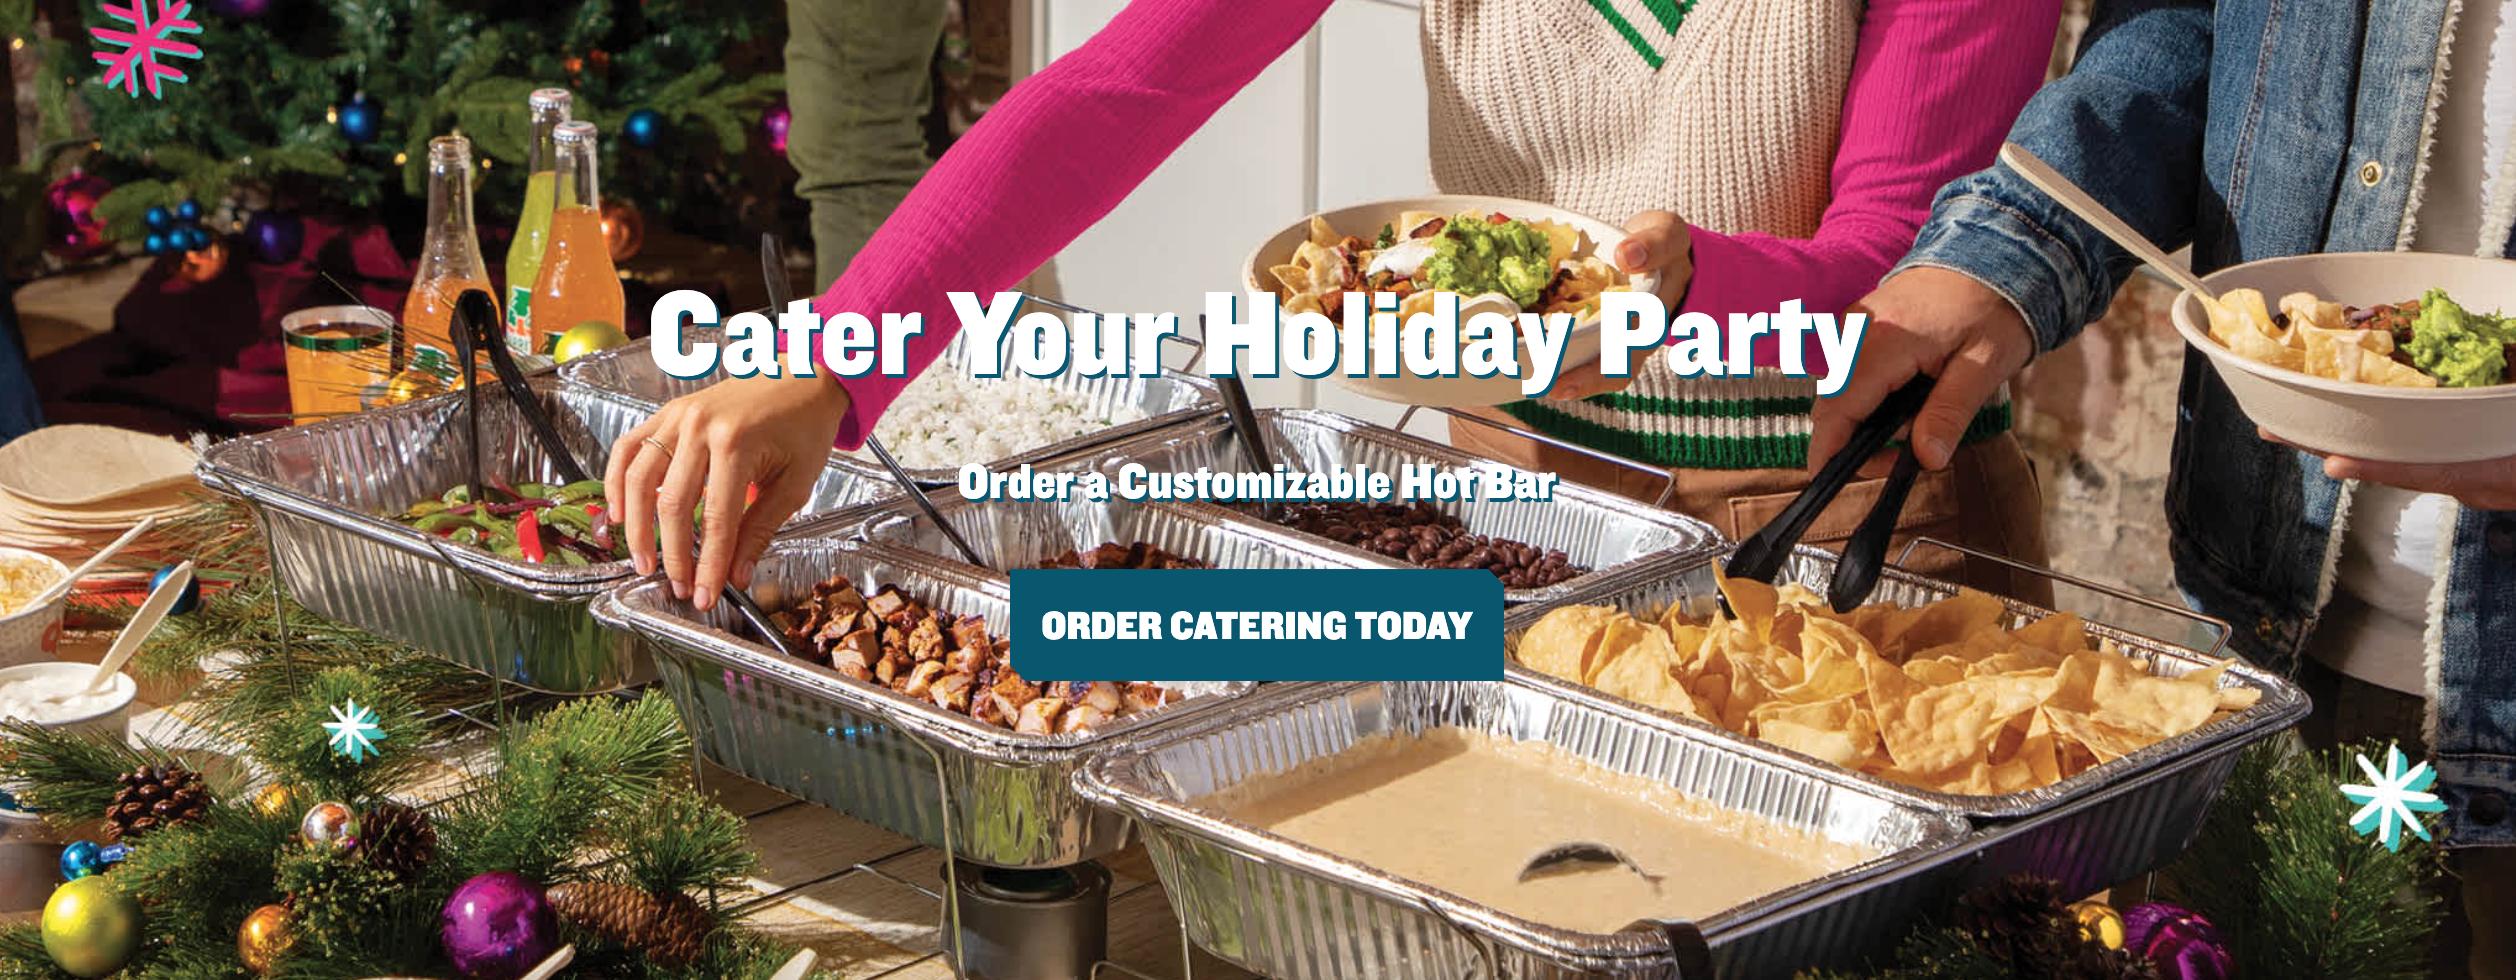 Hot Bar Holiday Catering with QDOBA